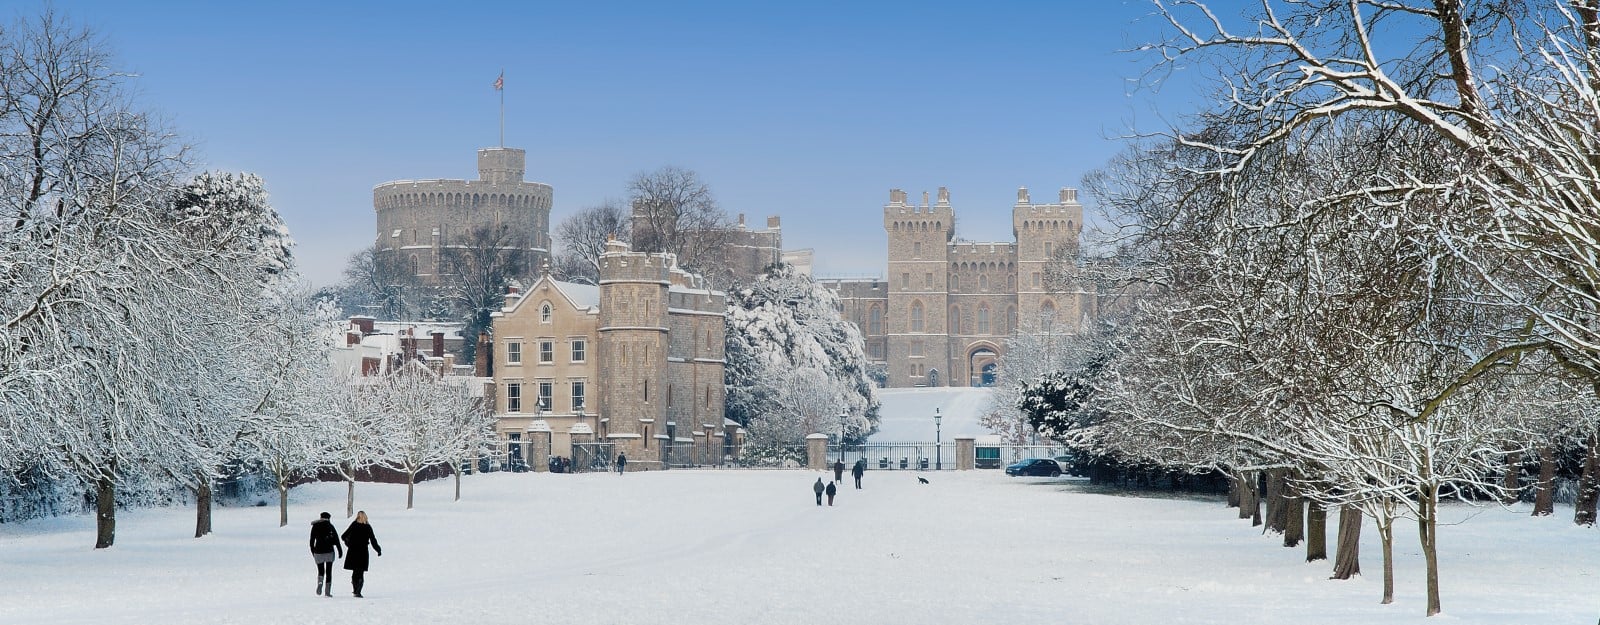 View of Windsor Castle from the Long Walk. Snow covers the ground.